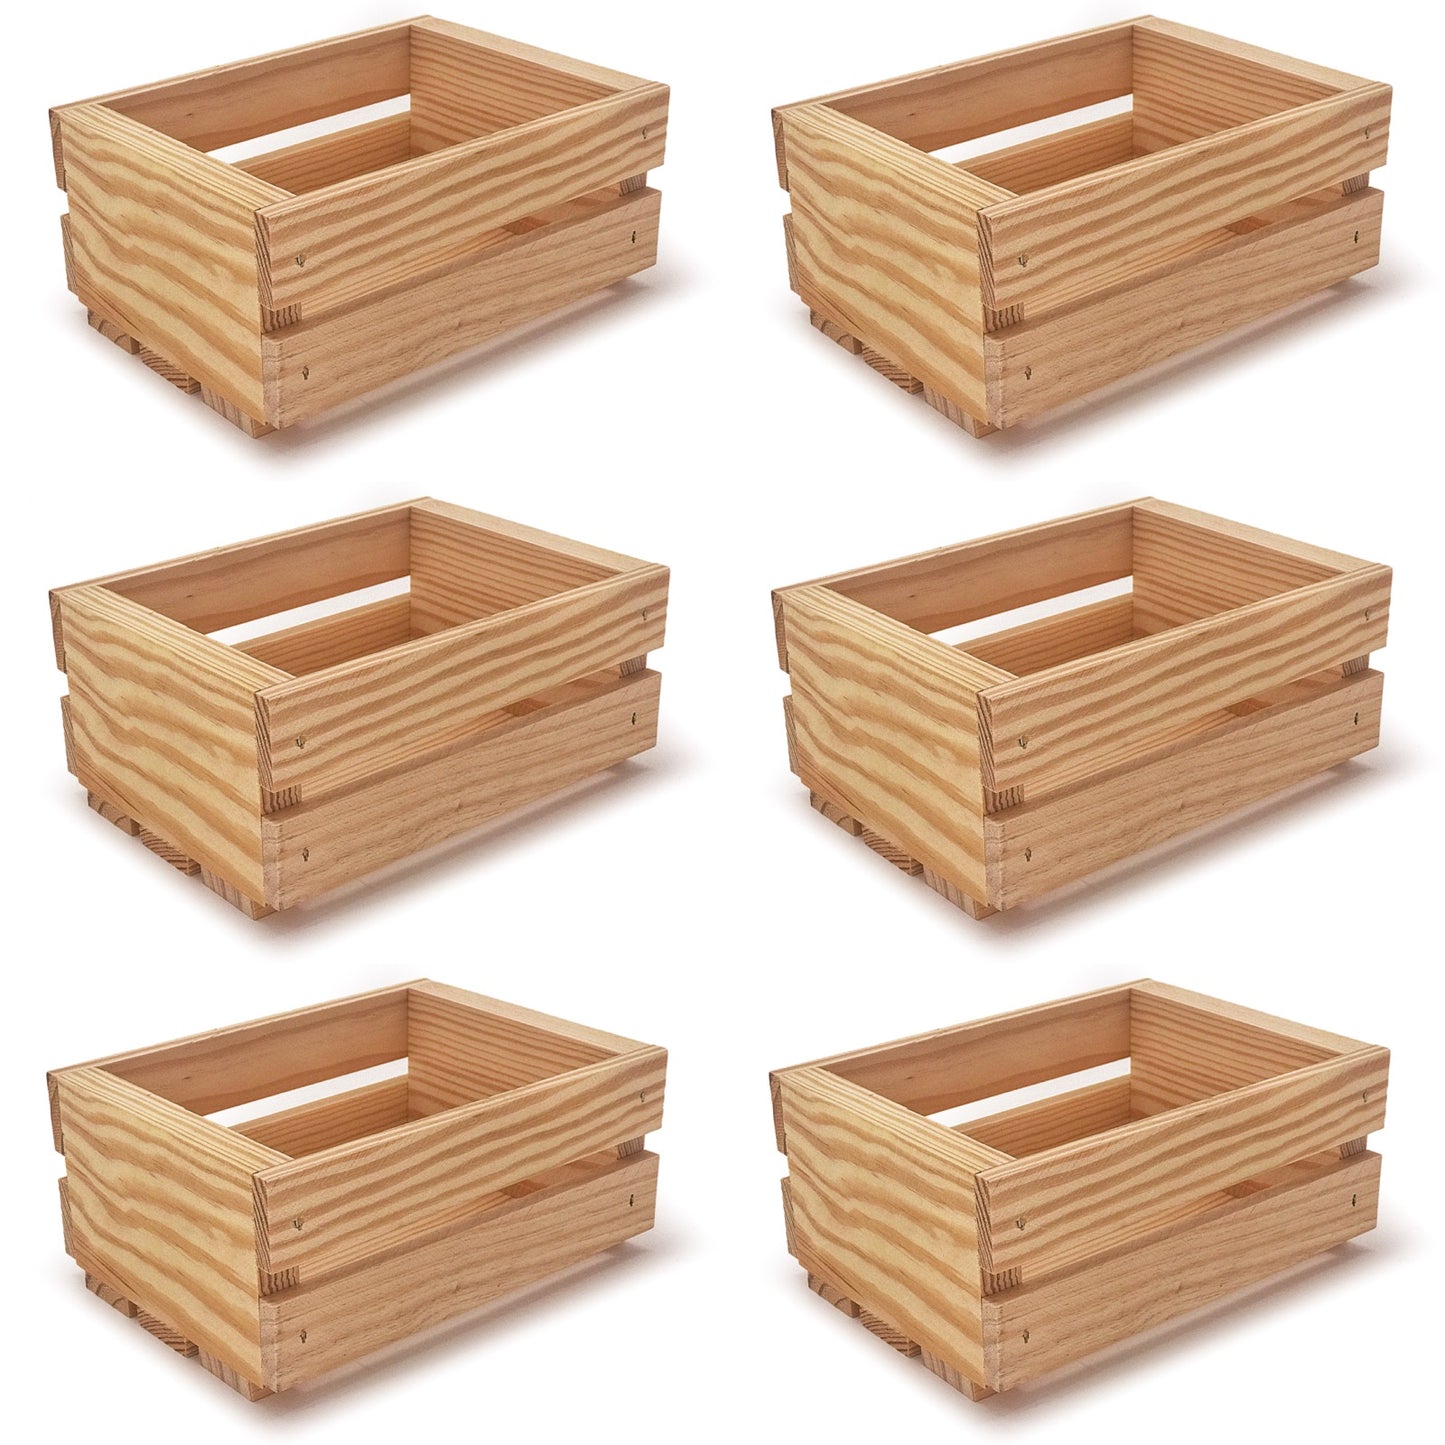 6 Small wooden crates 7.125x5.5x3.5